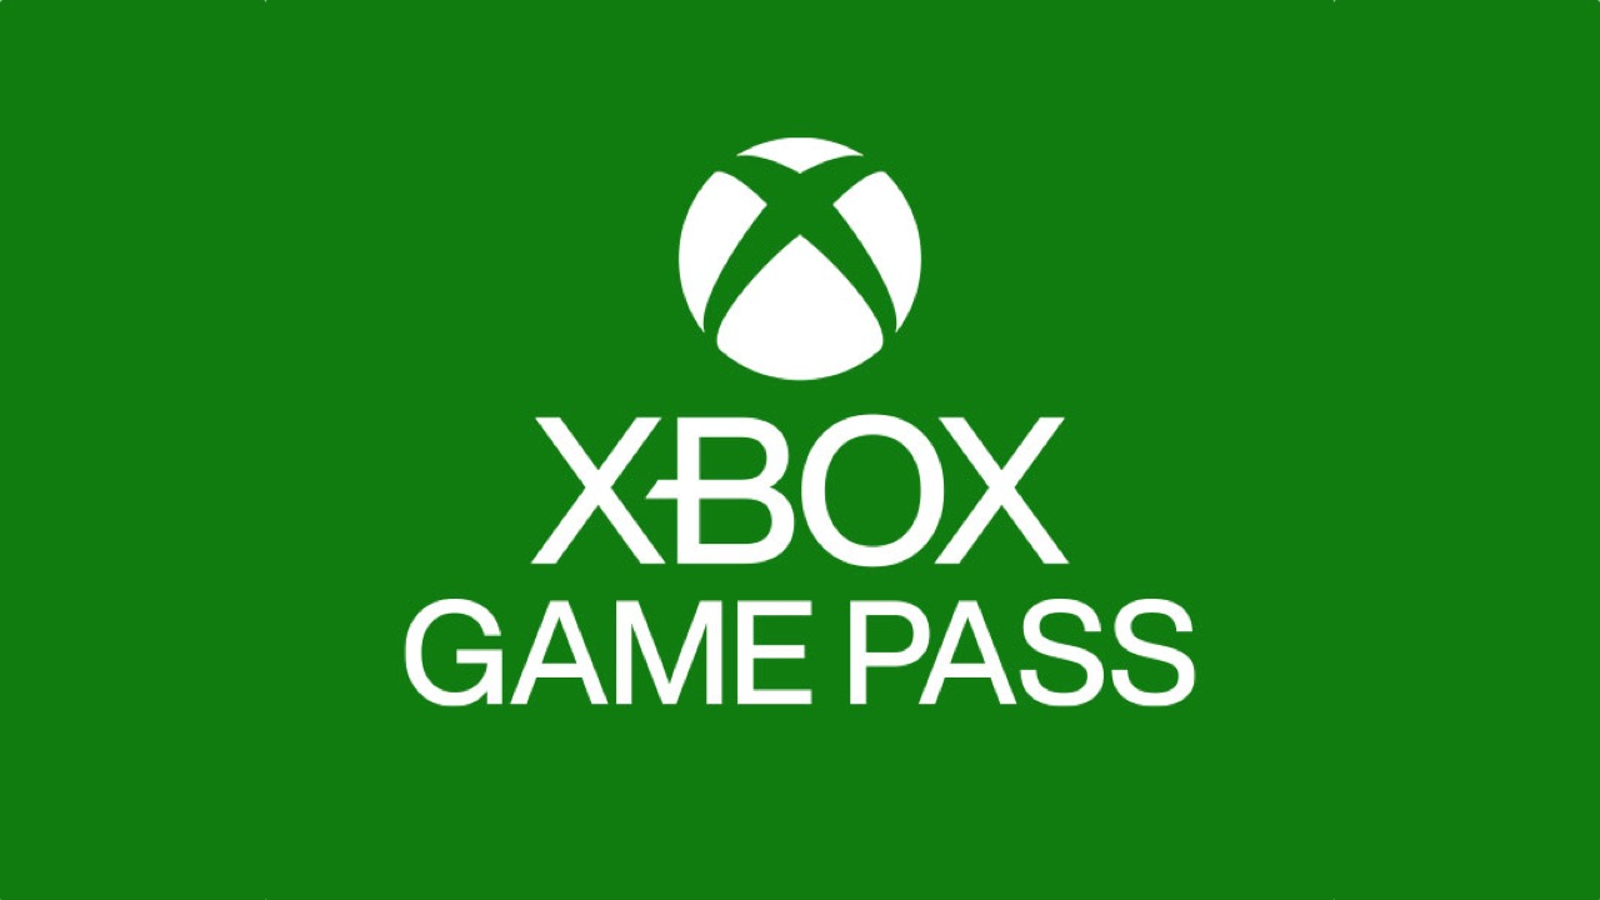 Xbox Game Pass Core 14 Day Trial Membership Code (Old Xbox Live